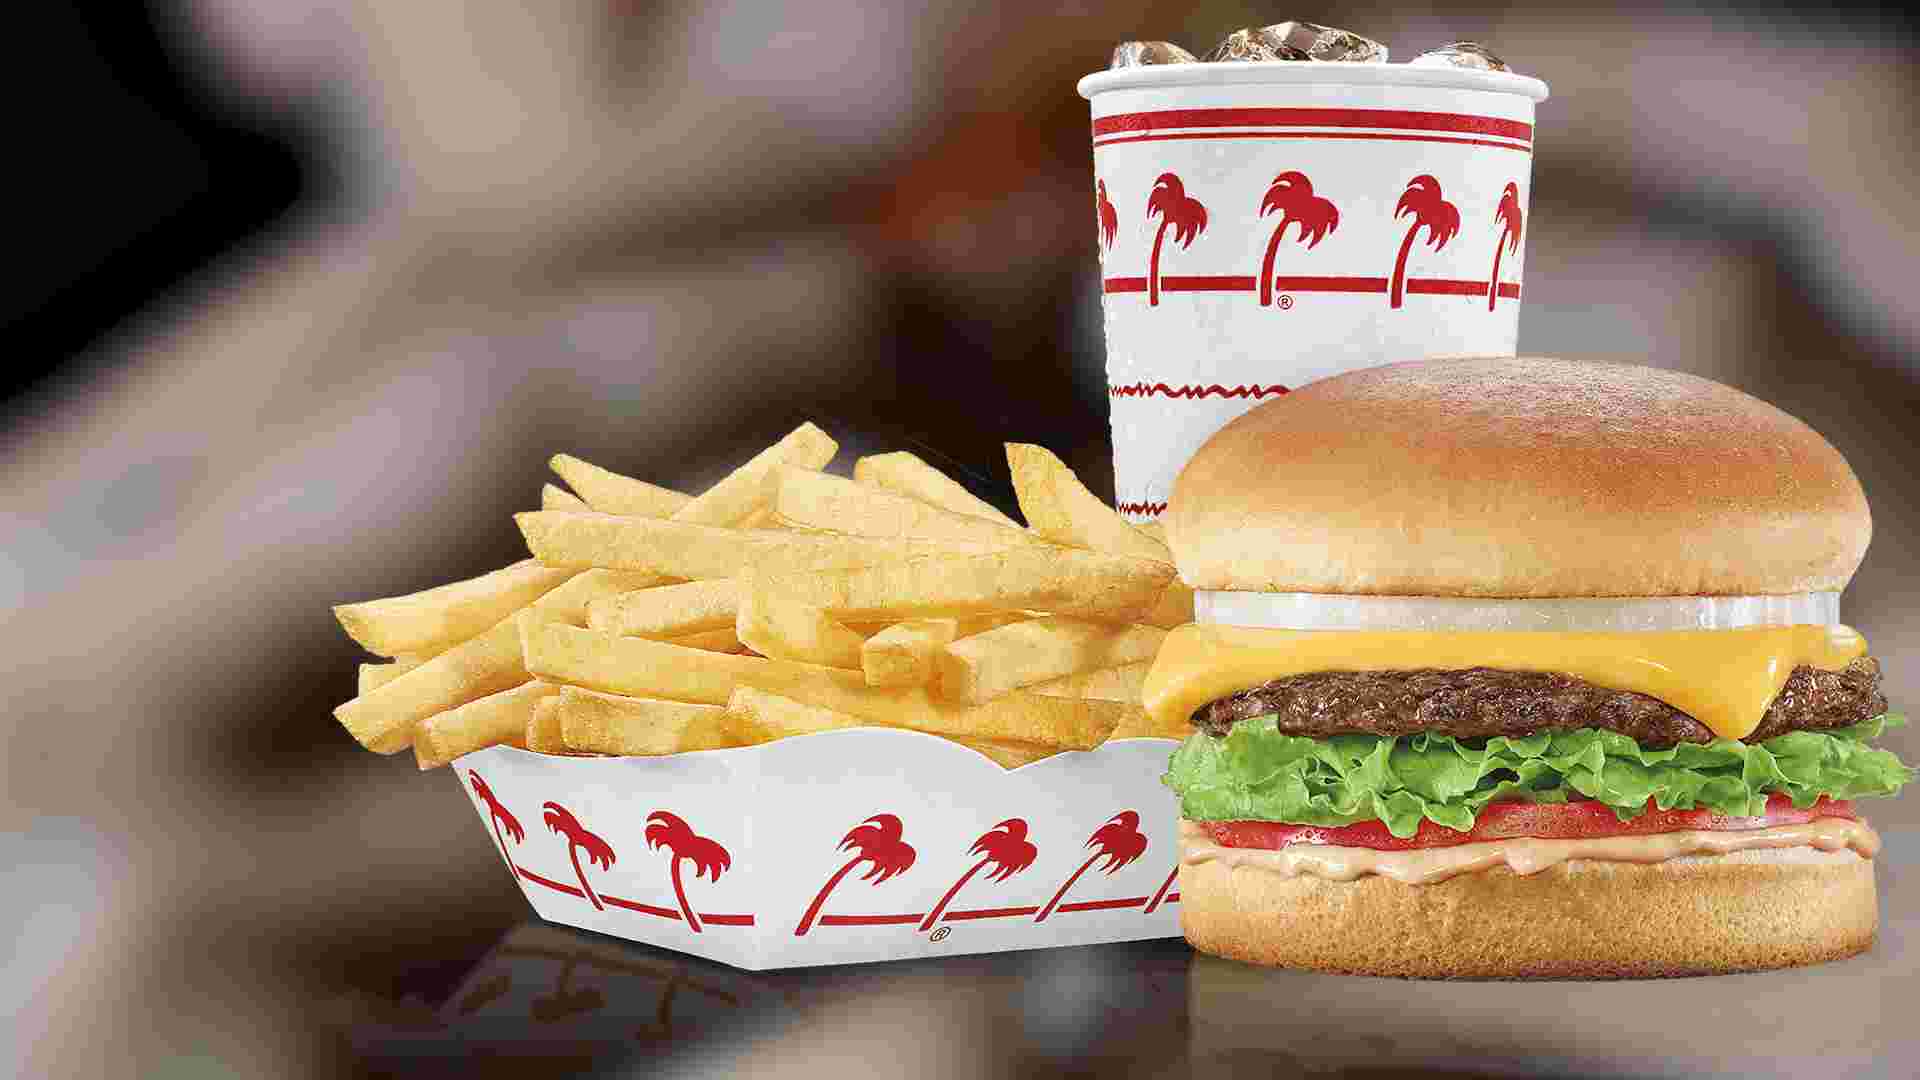 In N Out Burger Donates $000 To Republican Party, Sparking Boycott